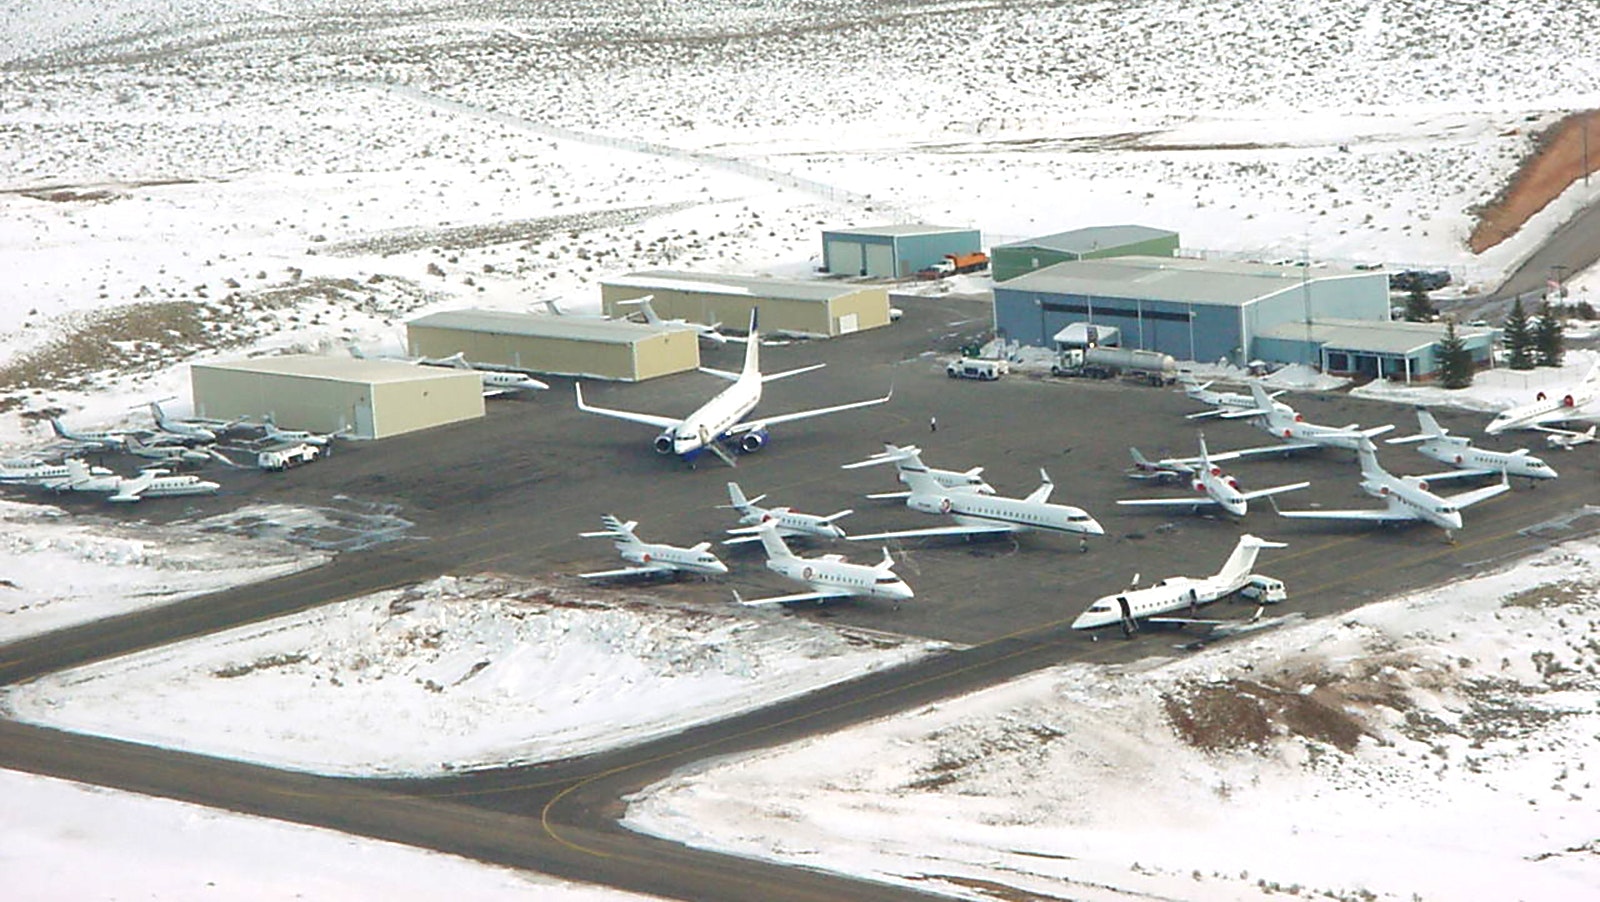 A variety of private jets are parked at the Evanston, Wyoming, airport in February 2002 during the Salt Lake City Winter Olympics.